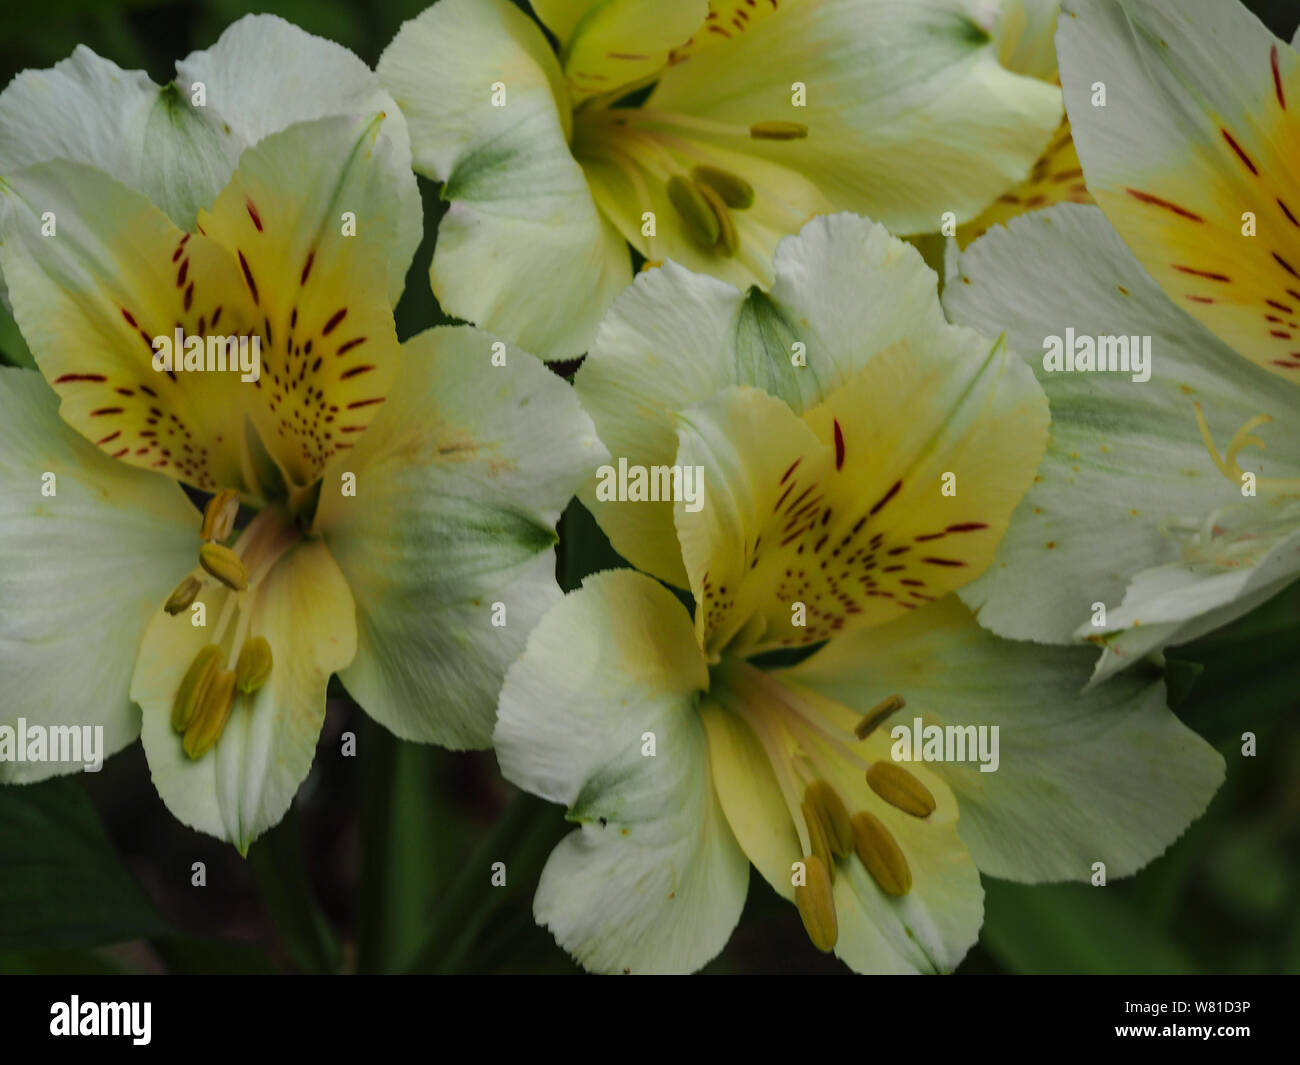 Closeup of beautiful Peruvian lily (Alstroemeria) flowers with white and yellow petals Stock Photo